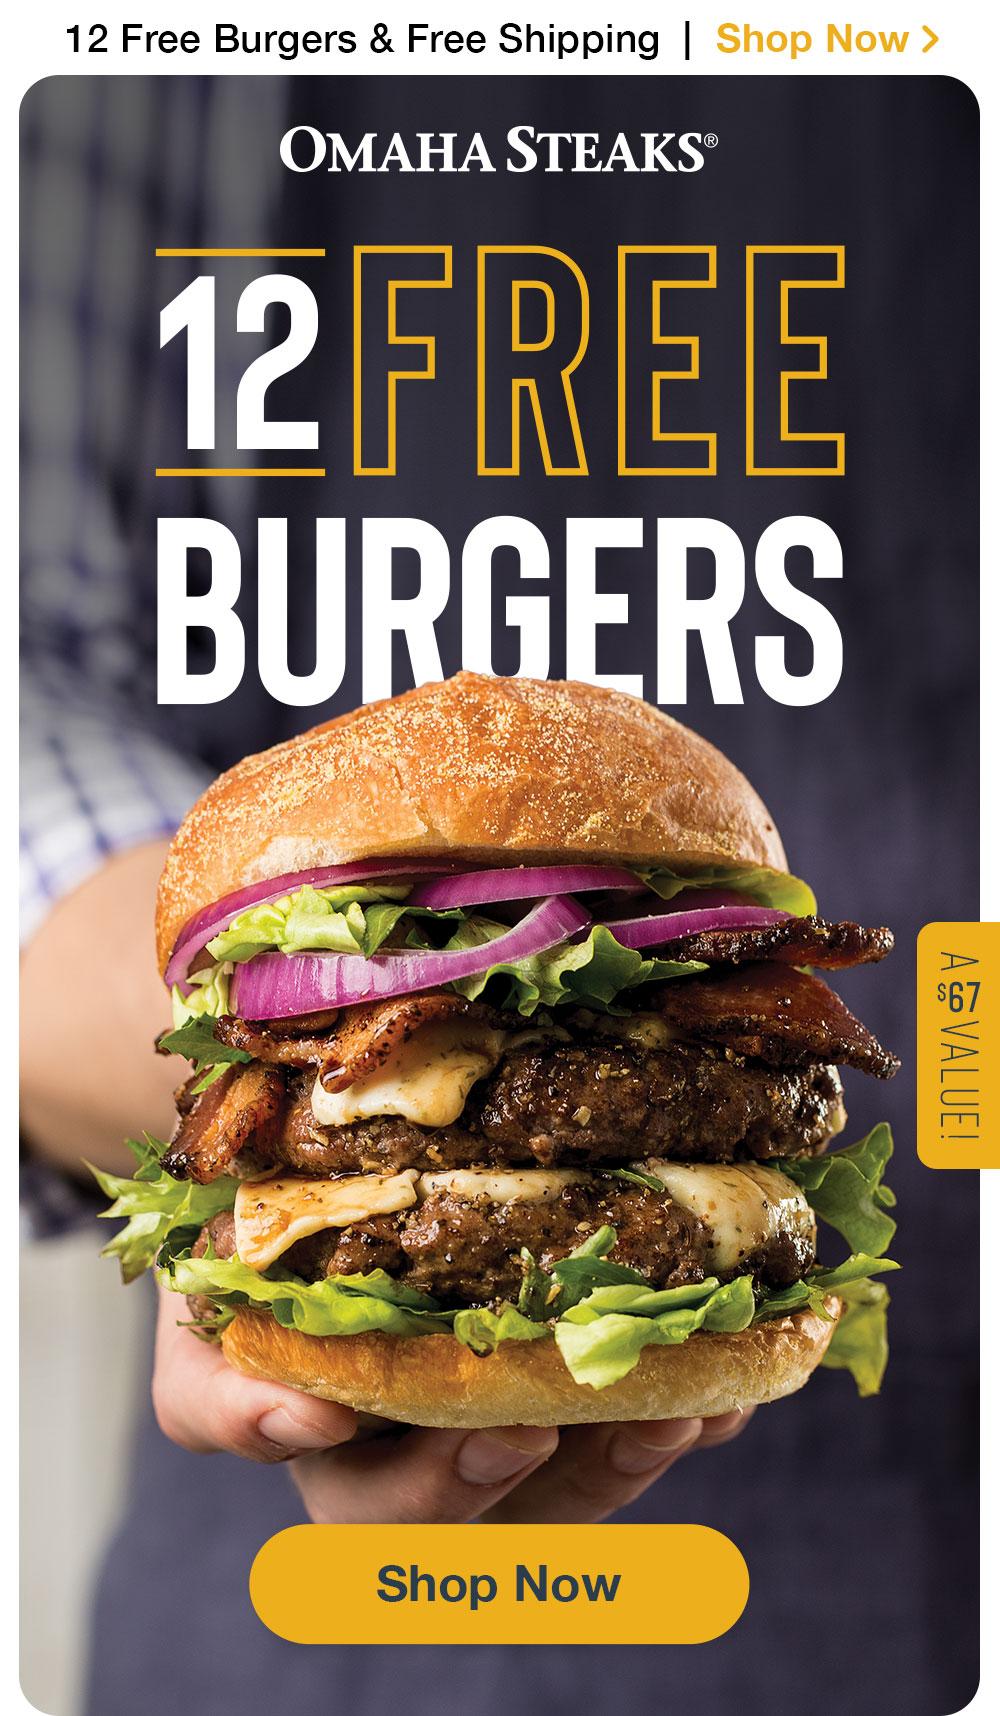 12 FREE BURGERS + FREE SHIPPING | SHOP NOW > | 12 FREE BURGERS | A $67 VALUE! || SHOP NOW